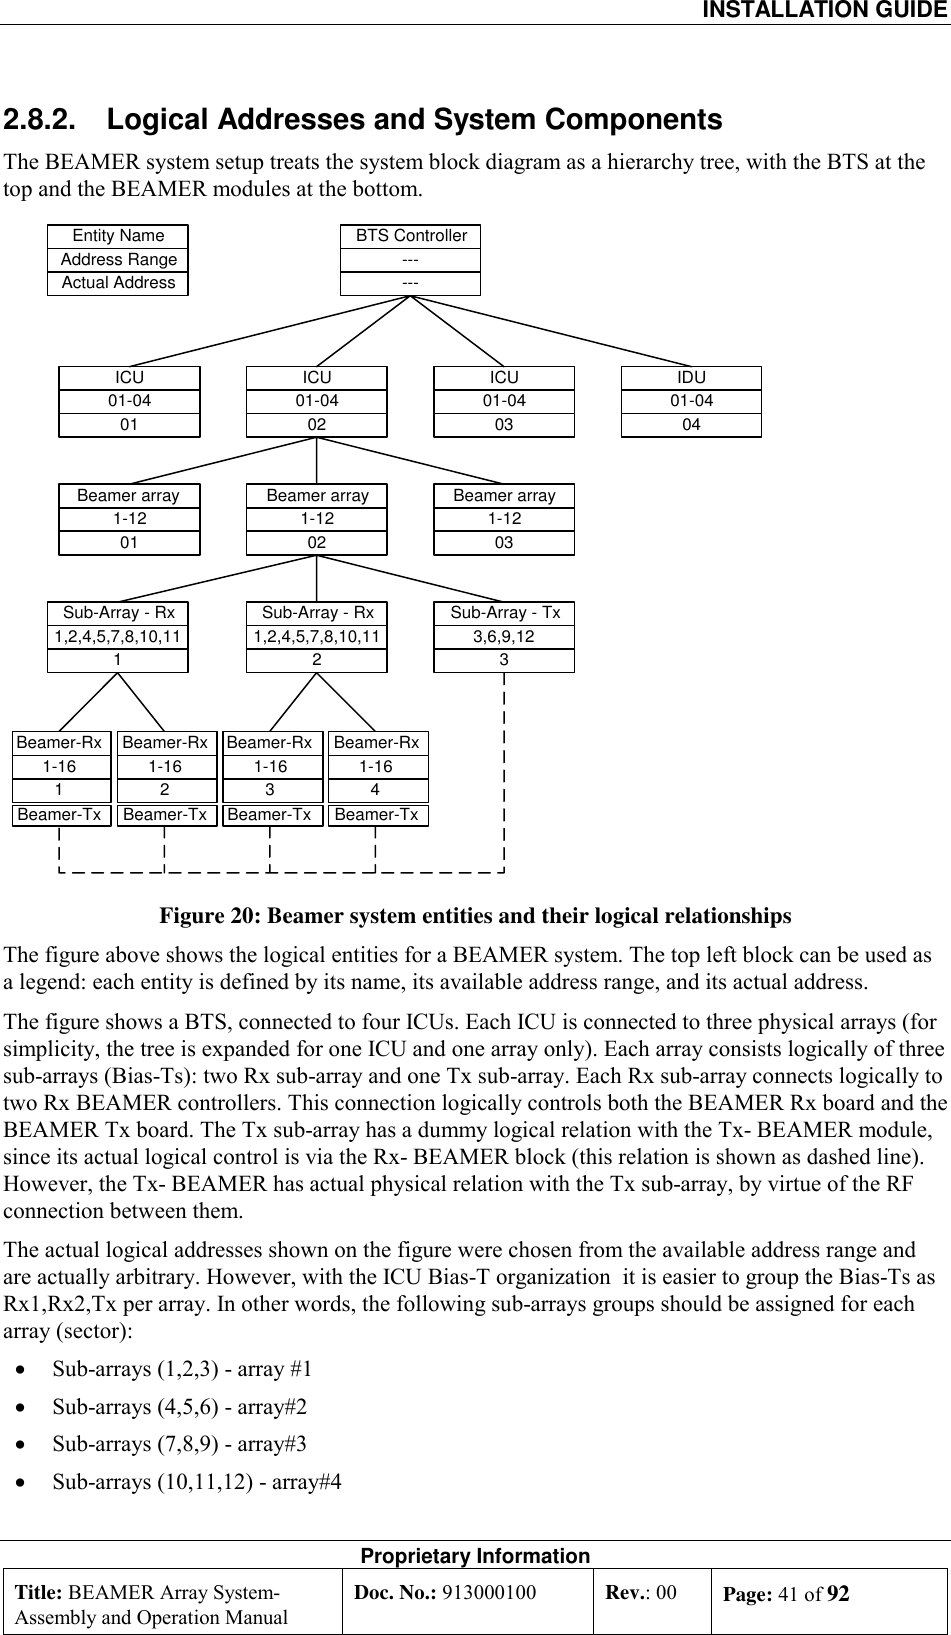  INSTALLATION GUIDE Proprietary Information Title: BEAMER Array System- Assembly and Operation Manual Doc. No.: 913000100  Rev.: 00  Page: 41 of 92  2.8.2.  Logical Addresses and System Components The BEAMER system setup treats the system block diagram as a hierarchy tree, with the BTS at the top and the BEAMER modules at the bottom. Figure 20: Beamer system entities and their logical relationships The figure above shows the logical entities for a BEAMER system. The top left block can be used as a legend: each entity is defined by its name, its available address range, and its actual address. The figure shows a BTS, connected to four ICUs. Each ICU is connected to three physical arrays (for simplicity, the tree is expanded for one ICU and one array only). Each array consists logically of three sub-arrays (Bias-Ts): two Rx sub-array and one Tx sub-array. Each Rx sub-array connects logically to two Rx BEAMER controllers. This connection logically controls both the BEAMER Rx board and the BEAMER Tx board. The Tx sub-array has a dummy logical relation with the Tx- BEAMER module, since its actual logical control is via the Rx- BEAMER block (this relation is shown as dashed line). However, the Tx- BEAMER has actual physical relation with the Tx sub-array, by virtue of the RF connection between them. The actual logical addresses shown on the figure were chosen from the available address range and are actually arbitrary. However, with the ICU Bias-T organization  it is easier to group the Bias-Ts as Rx1,Rx2,Tx per array. In other words, the following sub-arrays groups should be assigned for each array (sector): •  Sub-arrays (1,2,3) - array #1 •  Sub-arrays (4,5,6) - array#2 •  Sub-arrays (7,8,9) - array#3 •  Sub-arrays (10,11,12) - array#4 Entity NameAddress RangeActual AddressBTS Controller------ICU01-0402ICU01-0401ICU01-0403IDU01-0404Beamer array1-1202Beamer array1-1203Beamer array1-1201Sub-Array - Rx1,2,4,5,7,8,10,112Sub-Array - Rx1,2,4,5,7,8,10,111Sub-Array - Tx3,6,9,123Beamer-Rx1-164Beamer-TxBeamer-Rx1-163Beamer-TxBeamer-Rx1-162Beamer-TxBeamer-Rx1-161Beamer-Tx